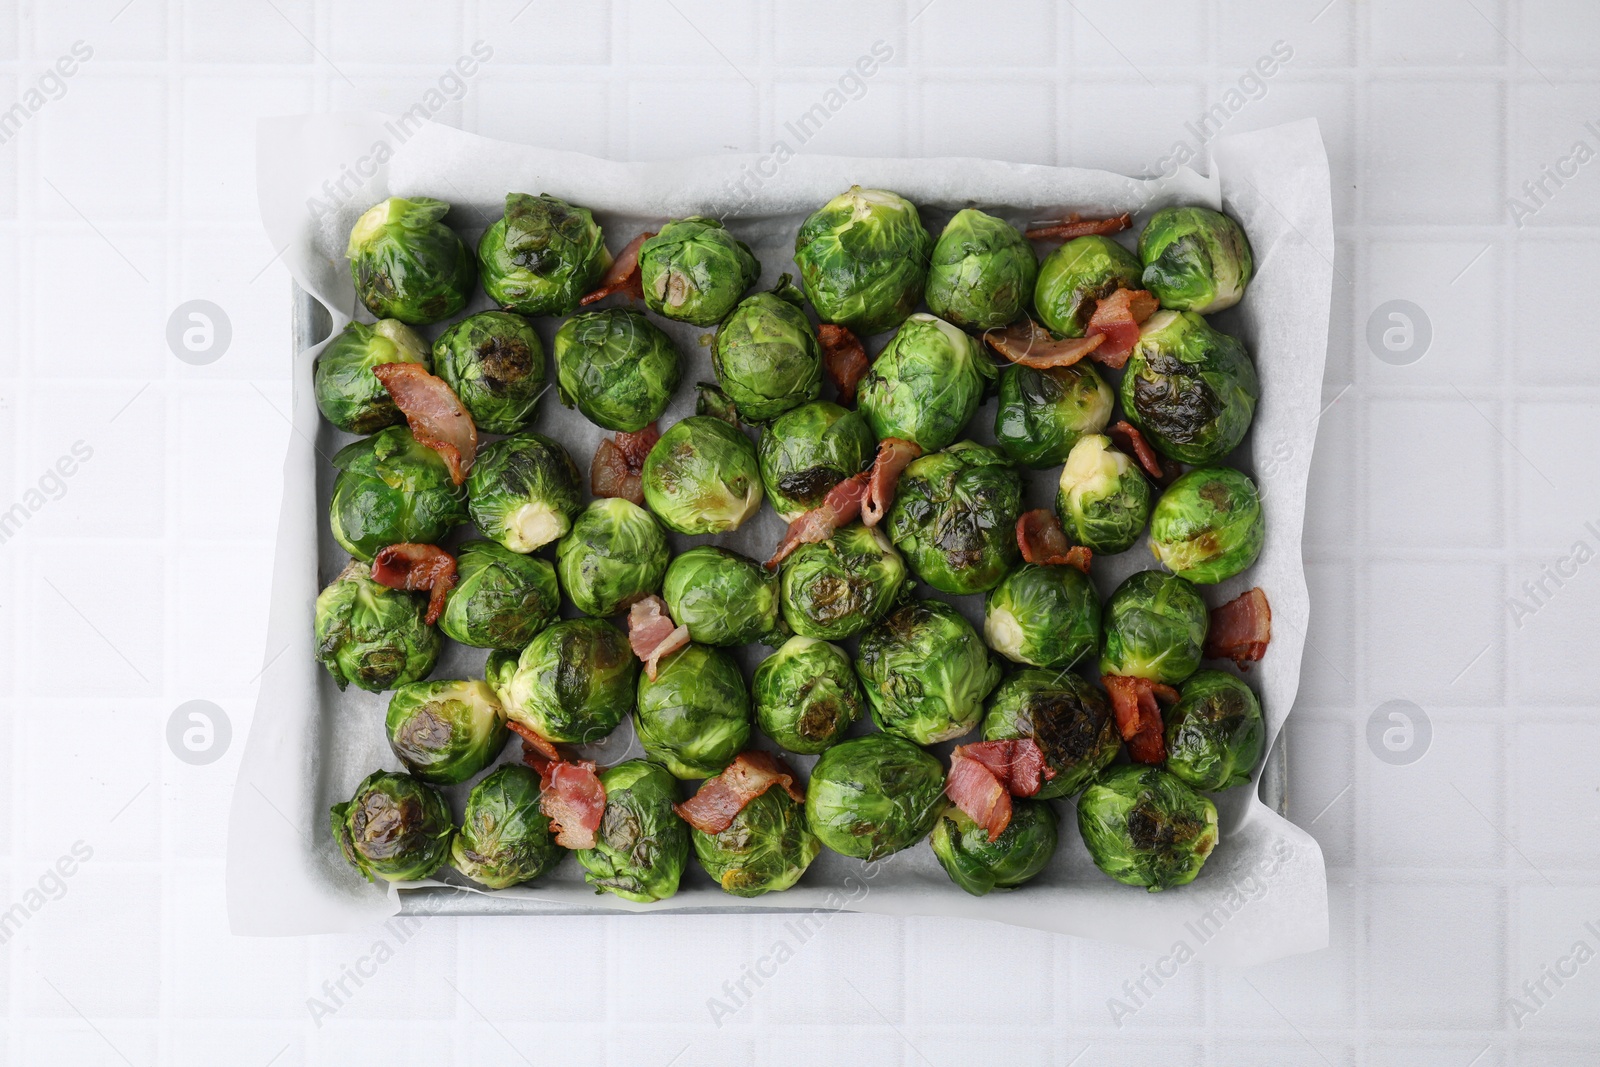 Photo of Delicious roasted Brussels sprouts and bacon in baking dish on white tiled table, top view